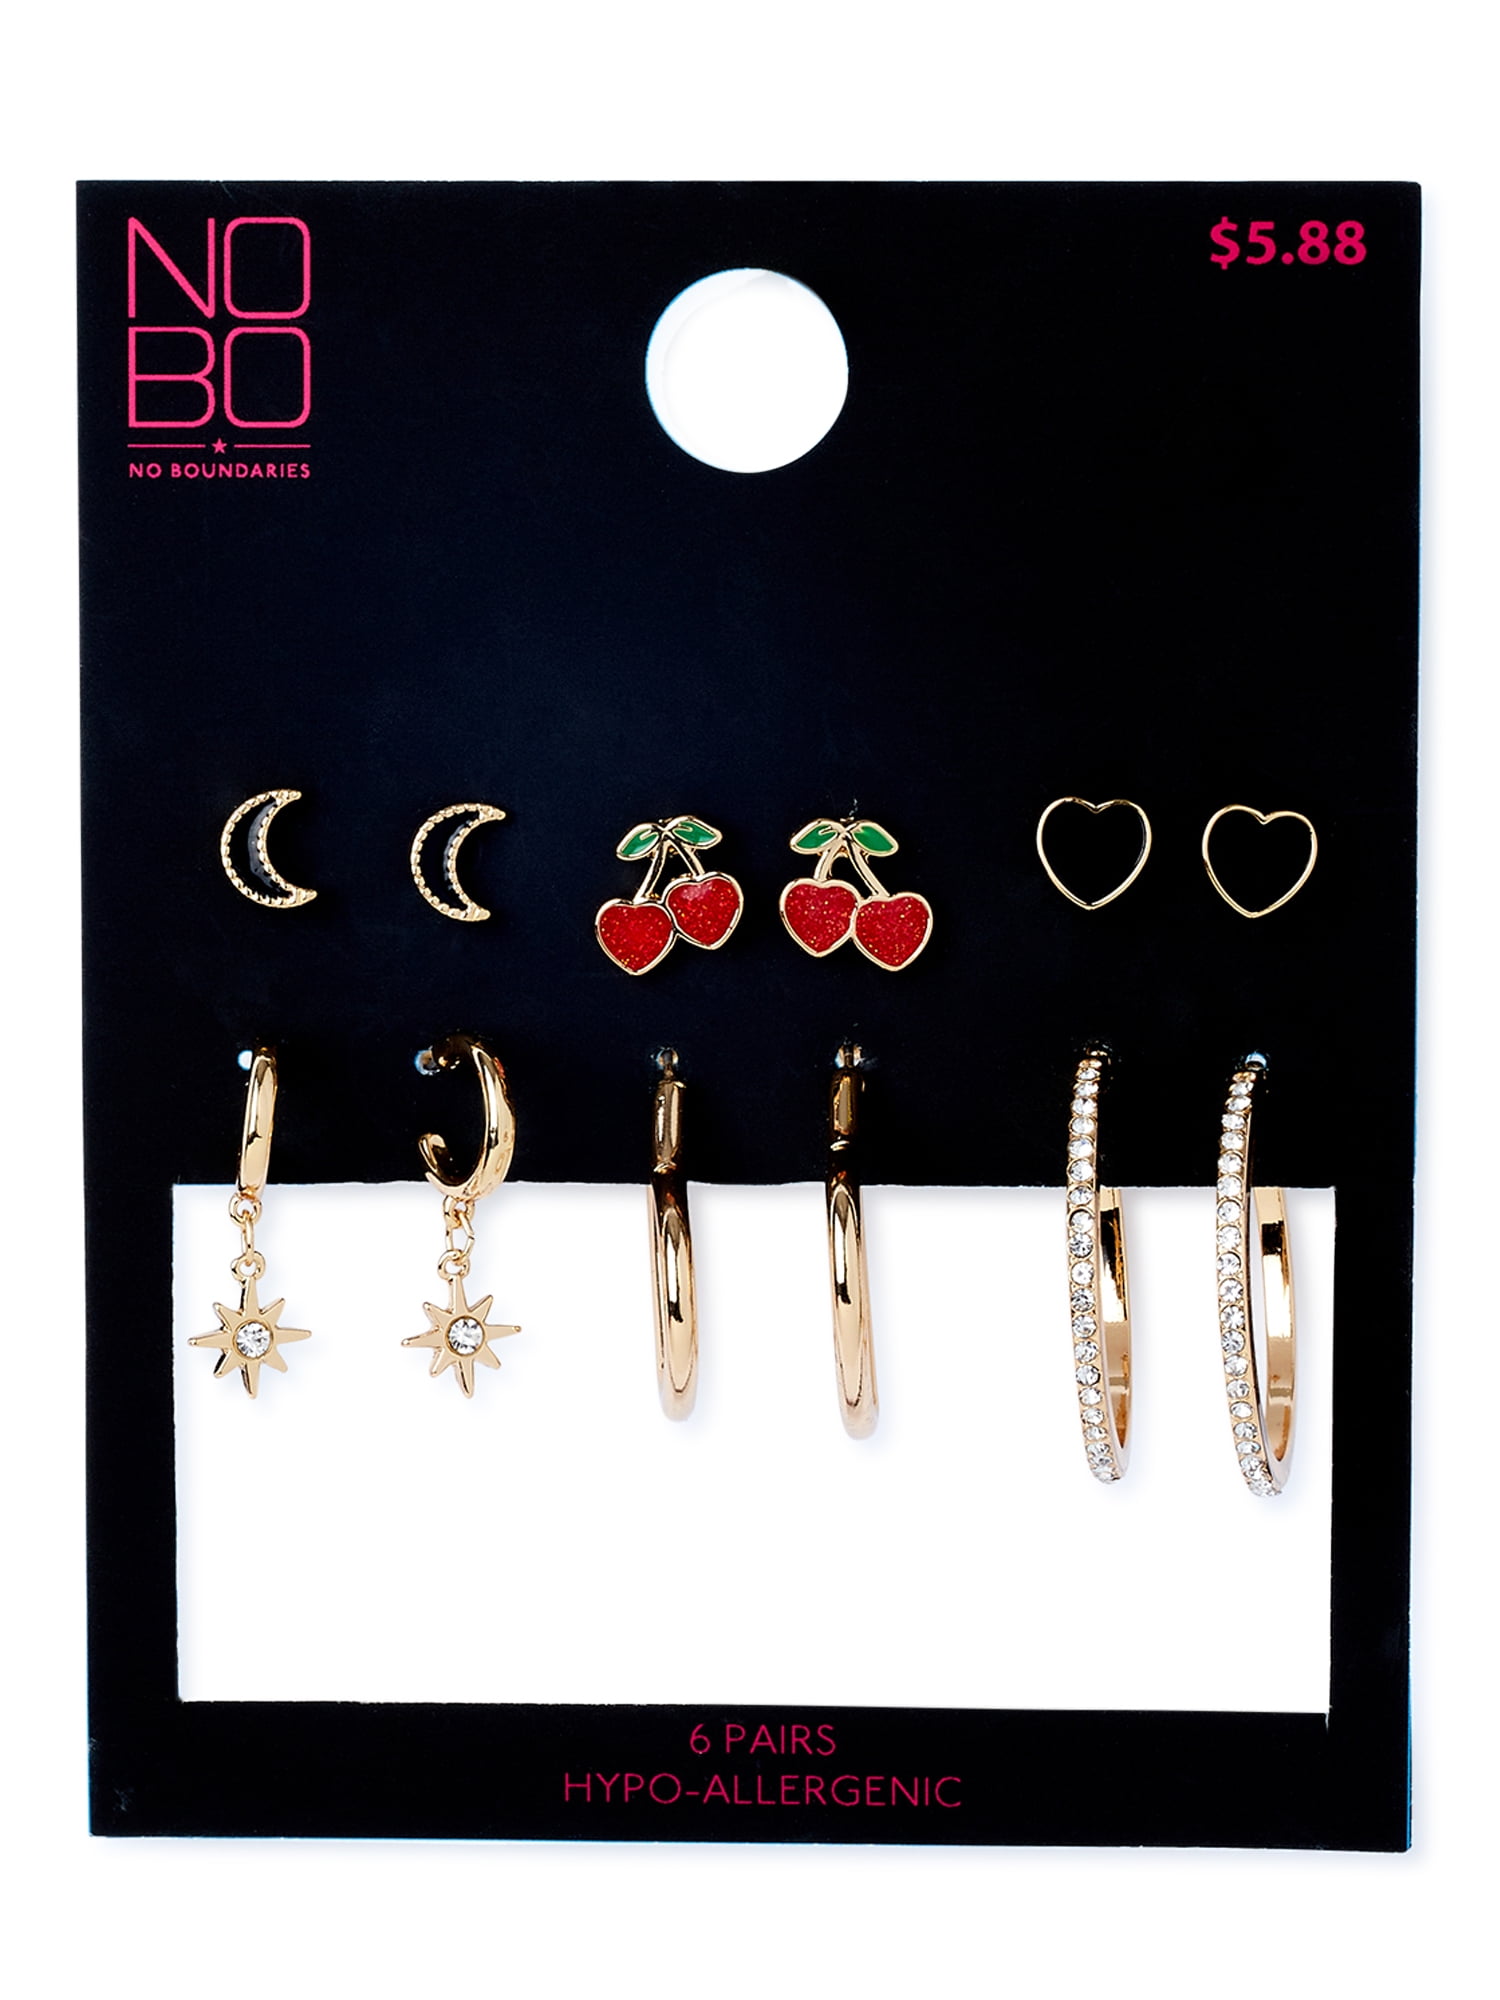 No Boundaries Cherry, Hearts and Moons Earrings Set, Six-Pair Pack